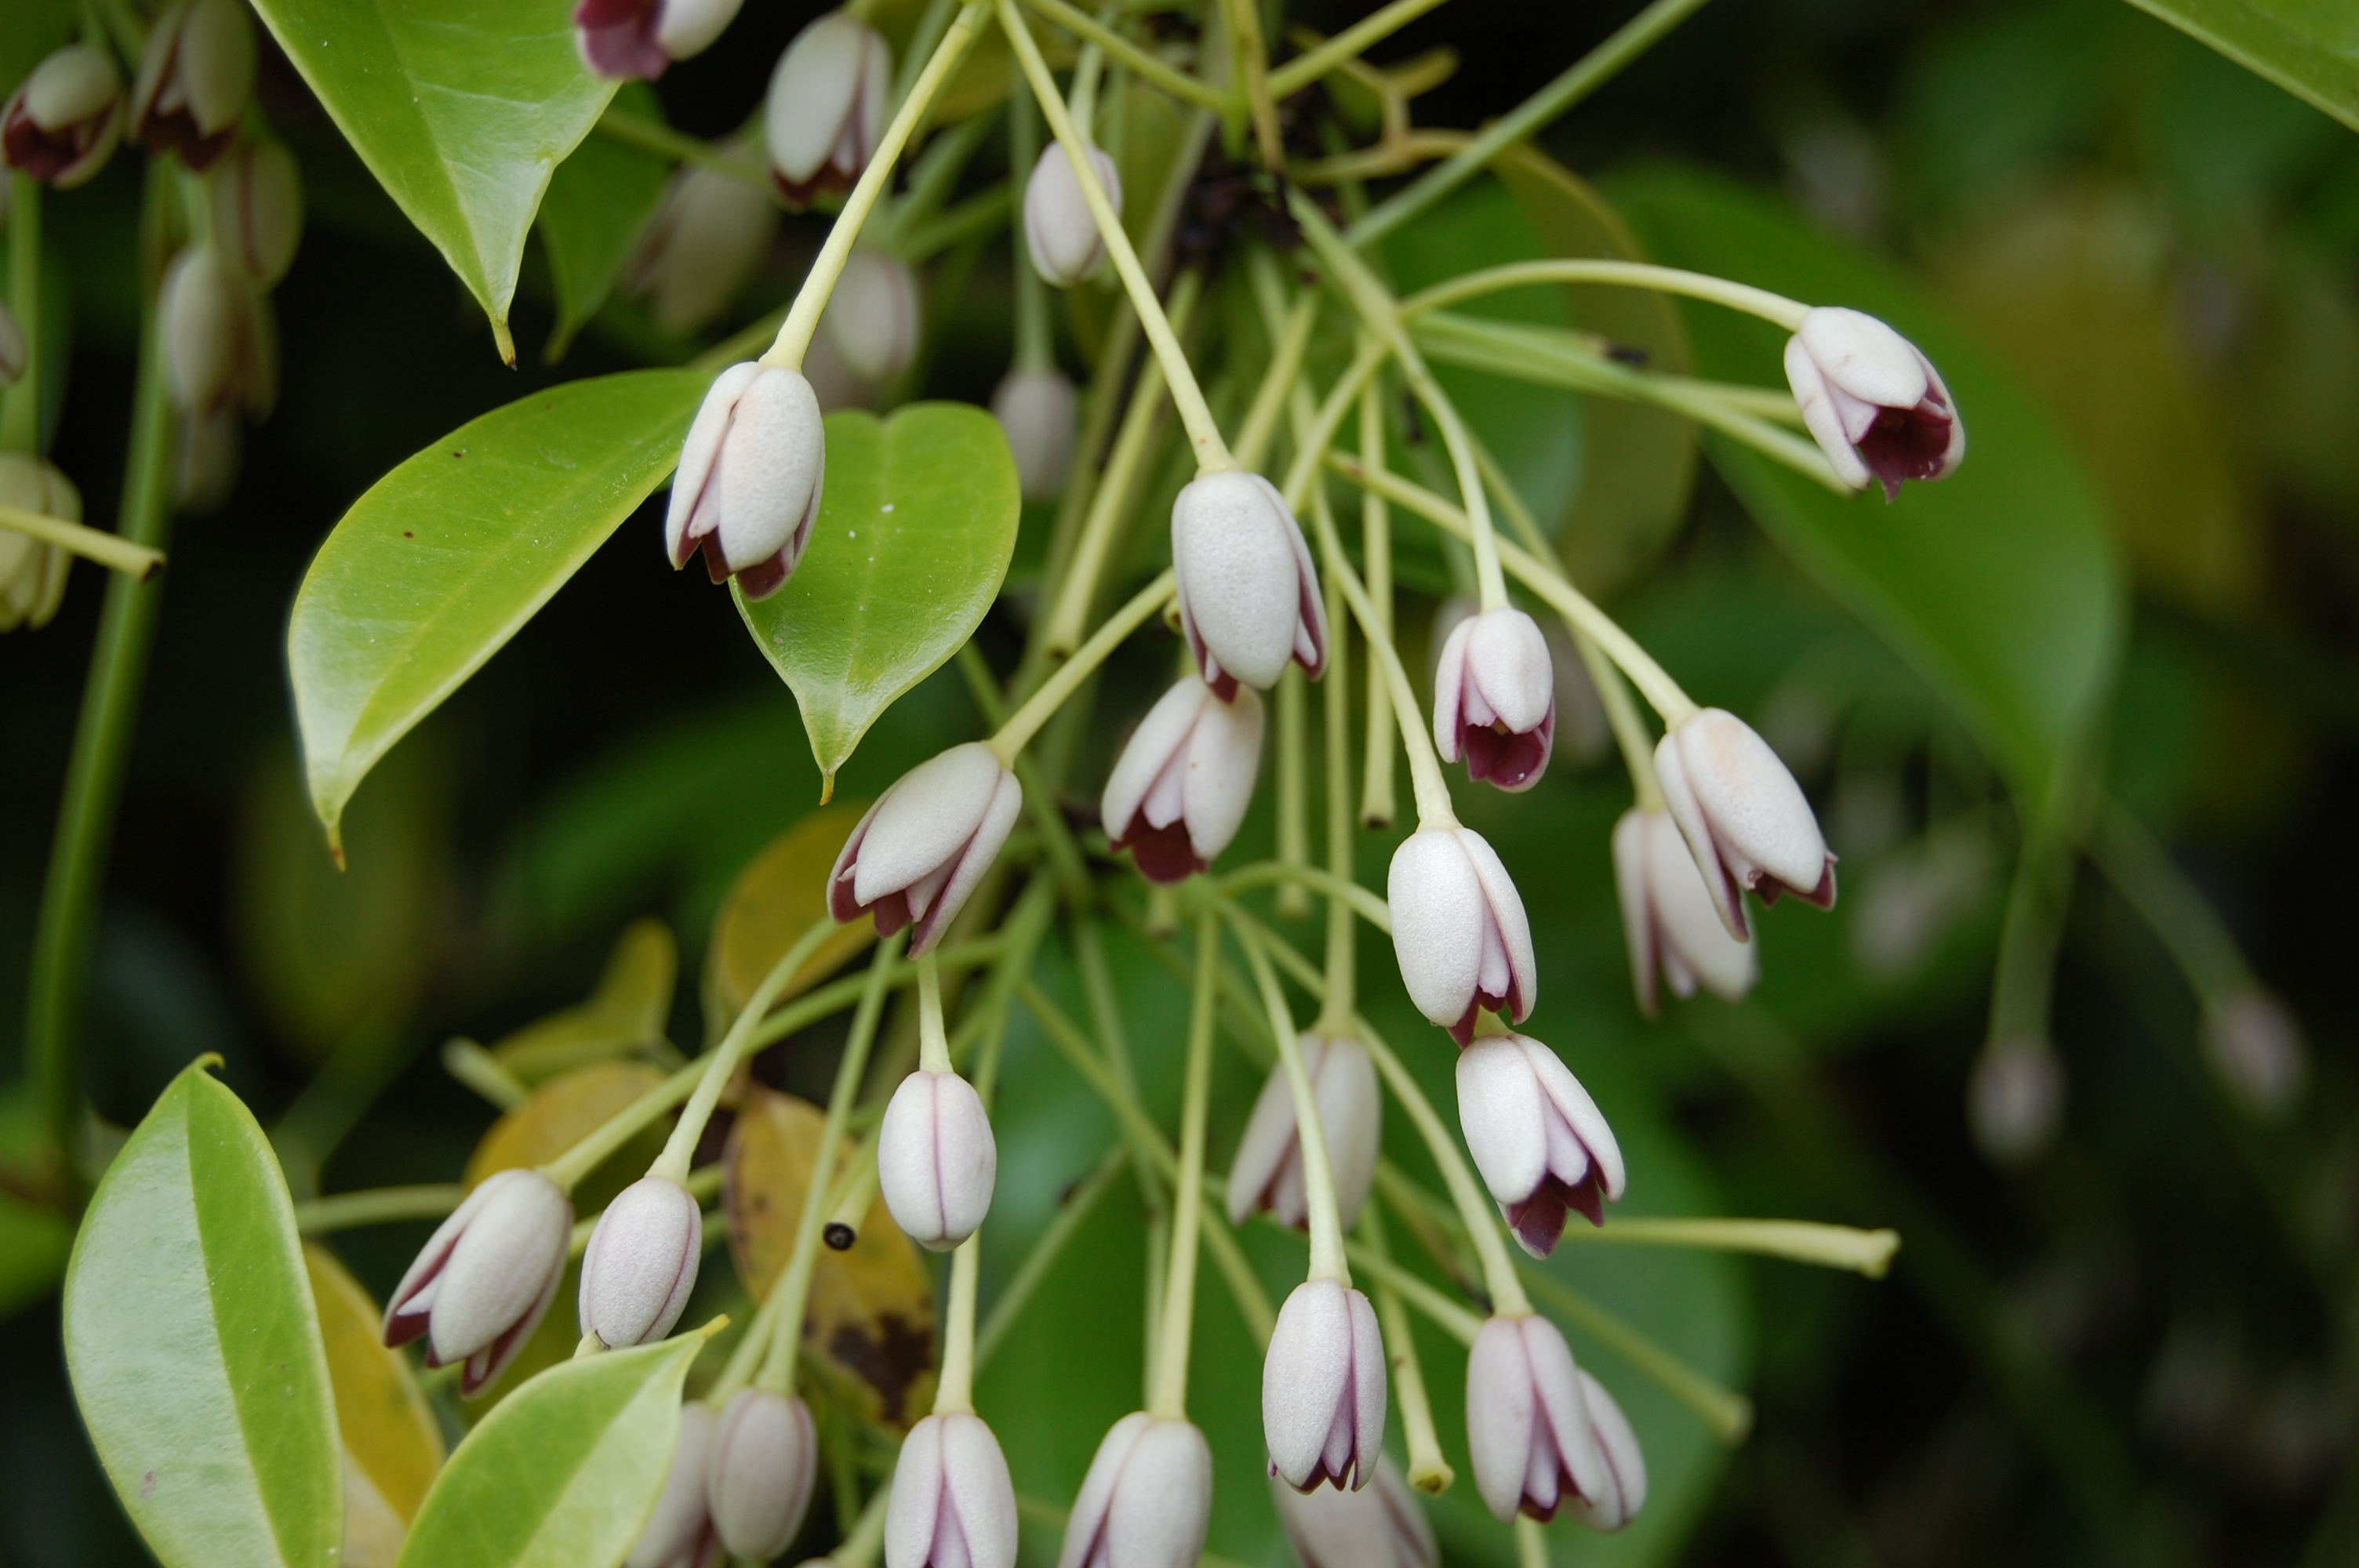 Originating from Nepal's jungles, “sausage vine” plant is famous in the UK, yet remains unknown in Nepal